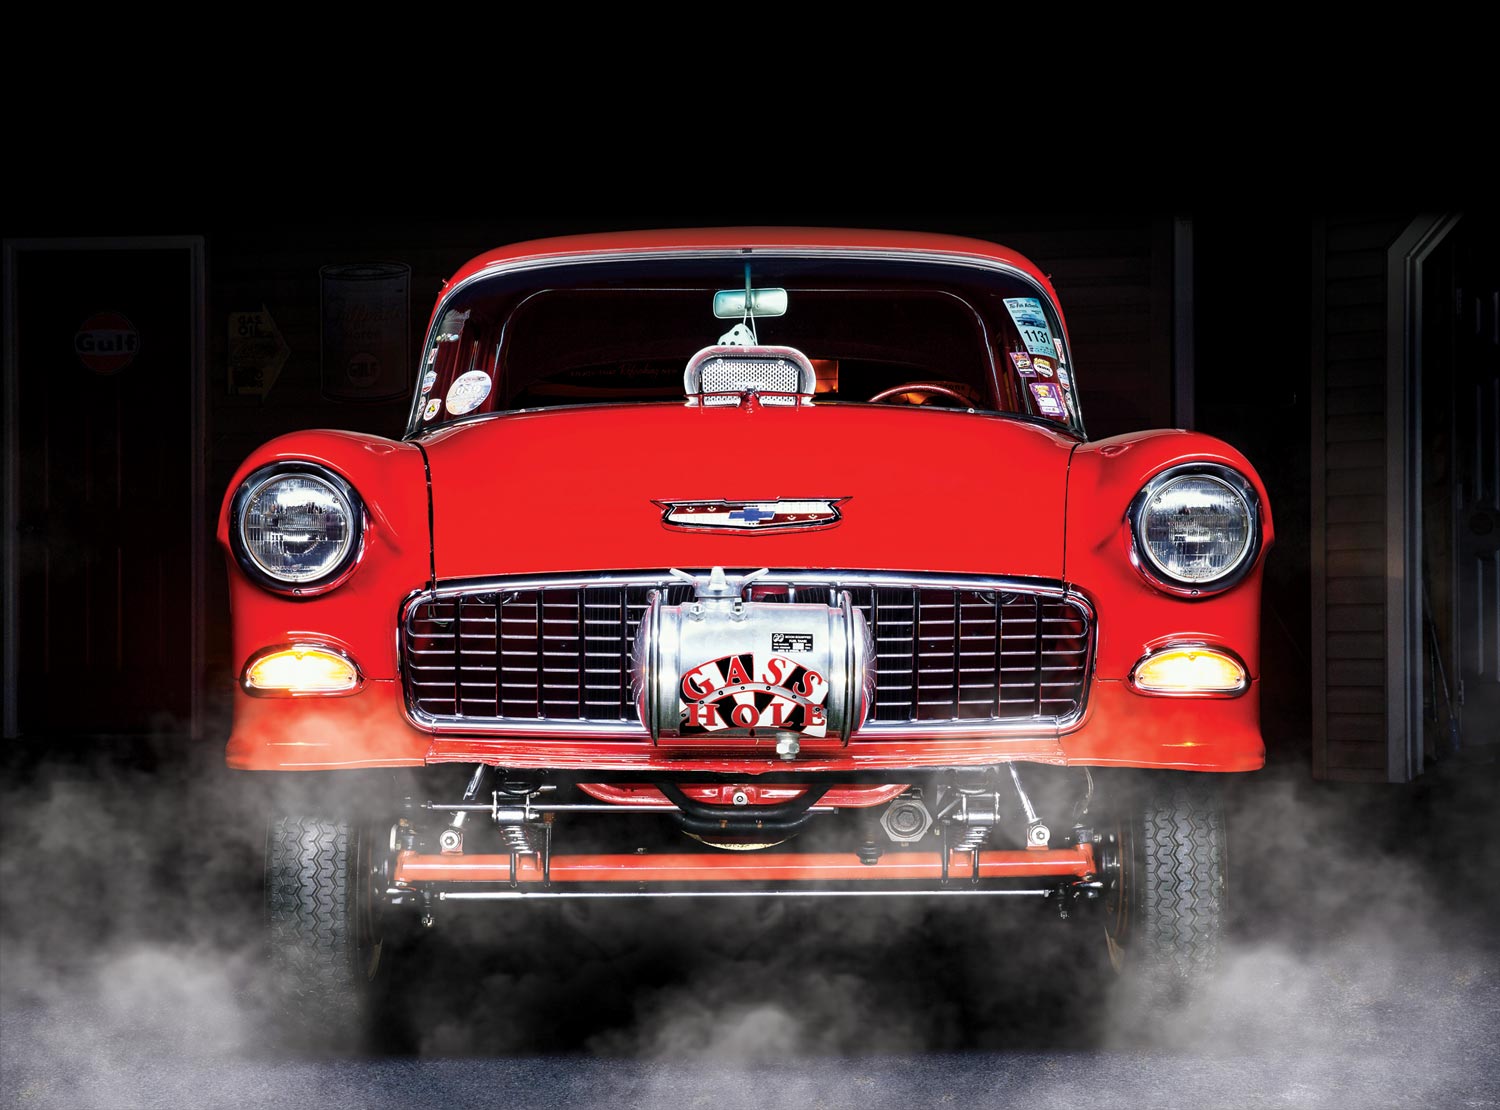 close front view of Garry Gallo's red '55 Chevy gasser, featuring various vintage stickers on the windshield, and a front tank reading "GASS HOLE"